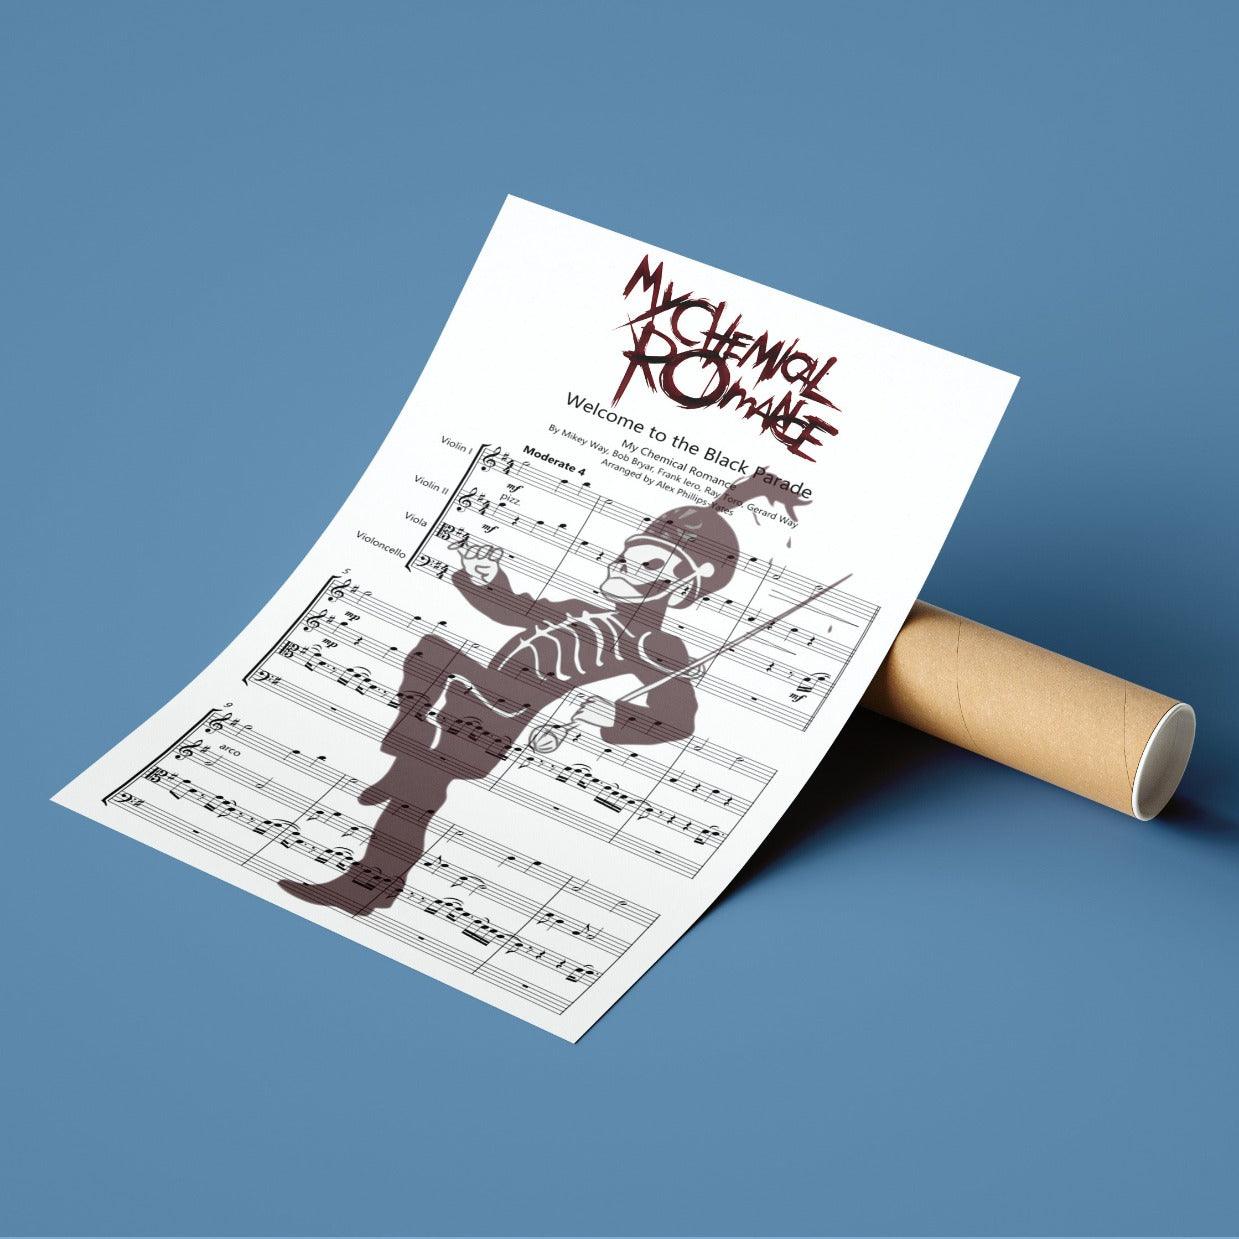 My Chemical Romance - Welcome To The Black Parade Song Music Sheet Notes Print Everyone has a favorite Song lyric prints and with My Chemical Romance now you can show the score as printed staff. The personal favorite song lyrics art shows the song chosen as the score.